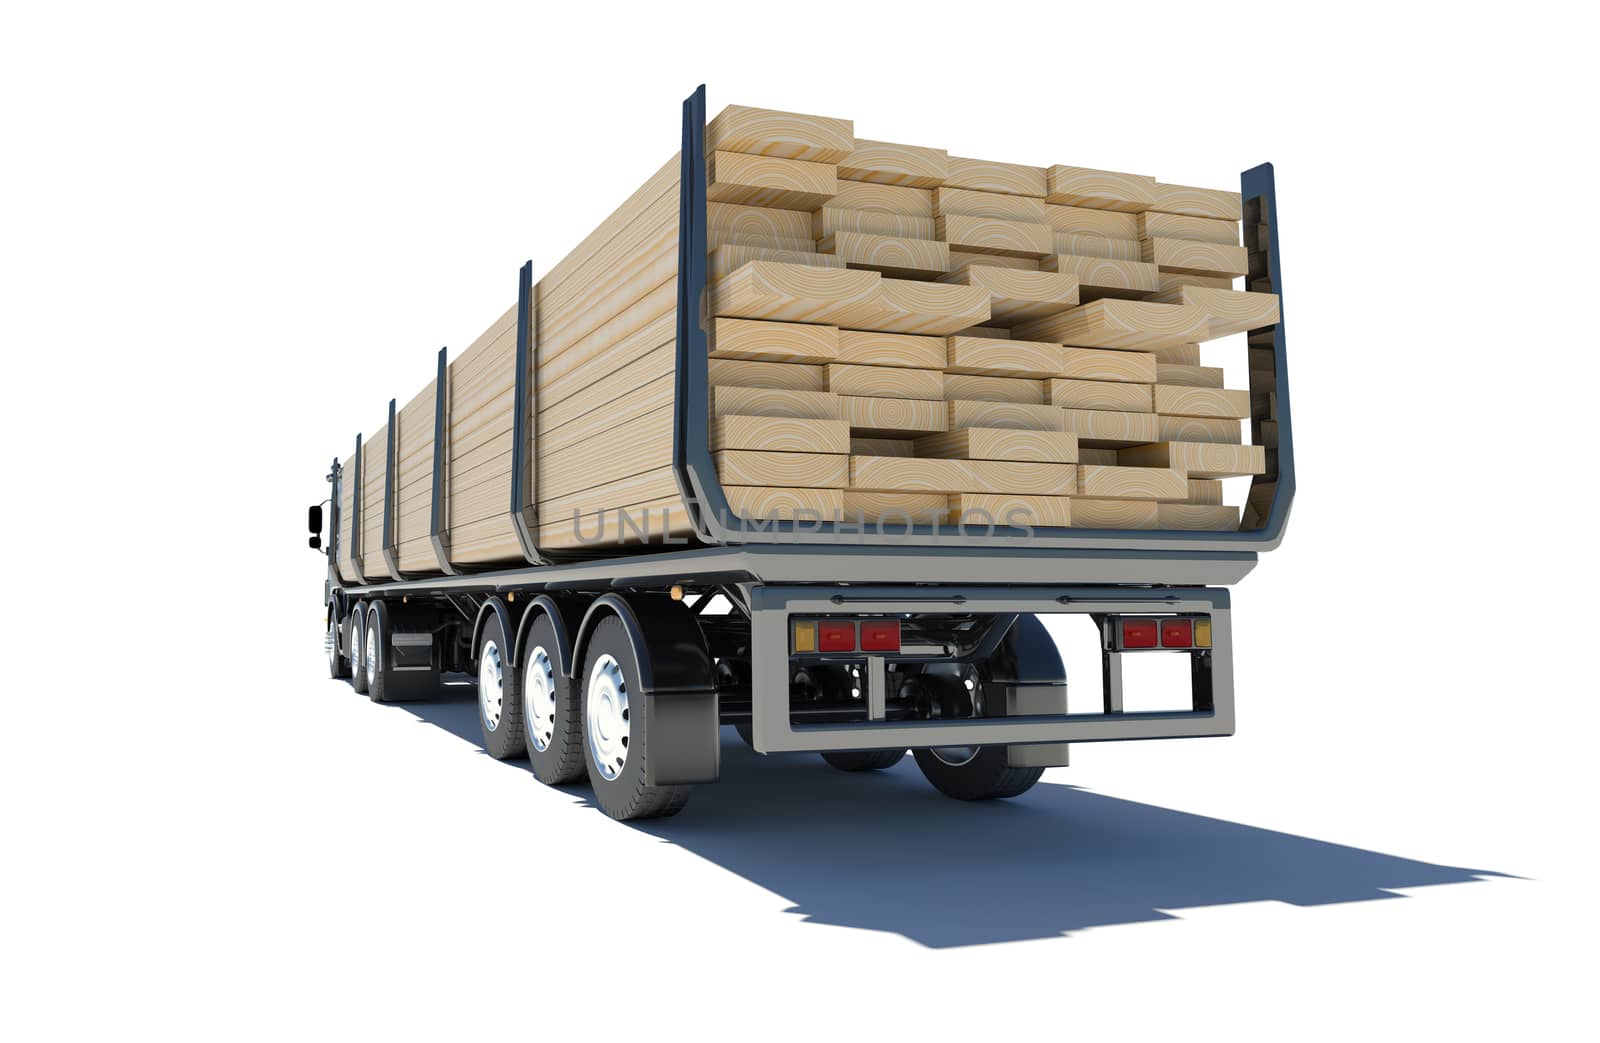 Truck transporting lumber. Rear view by cherezoff